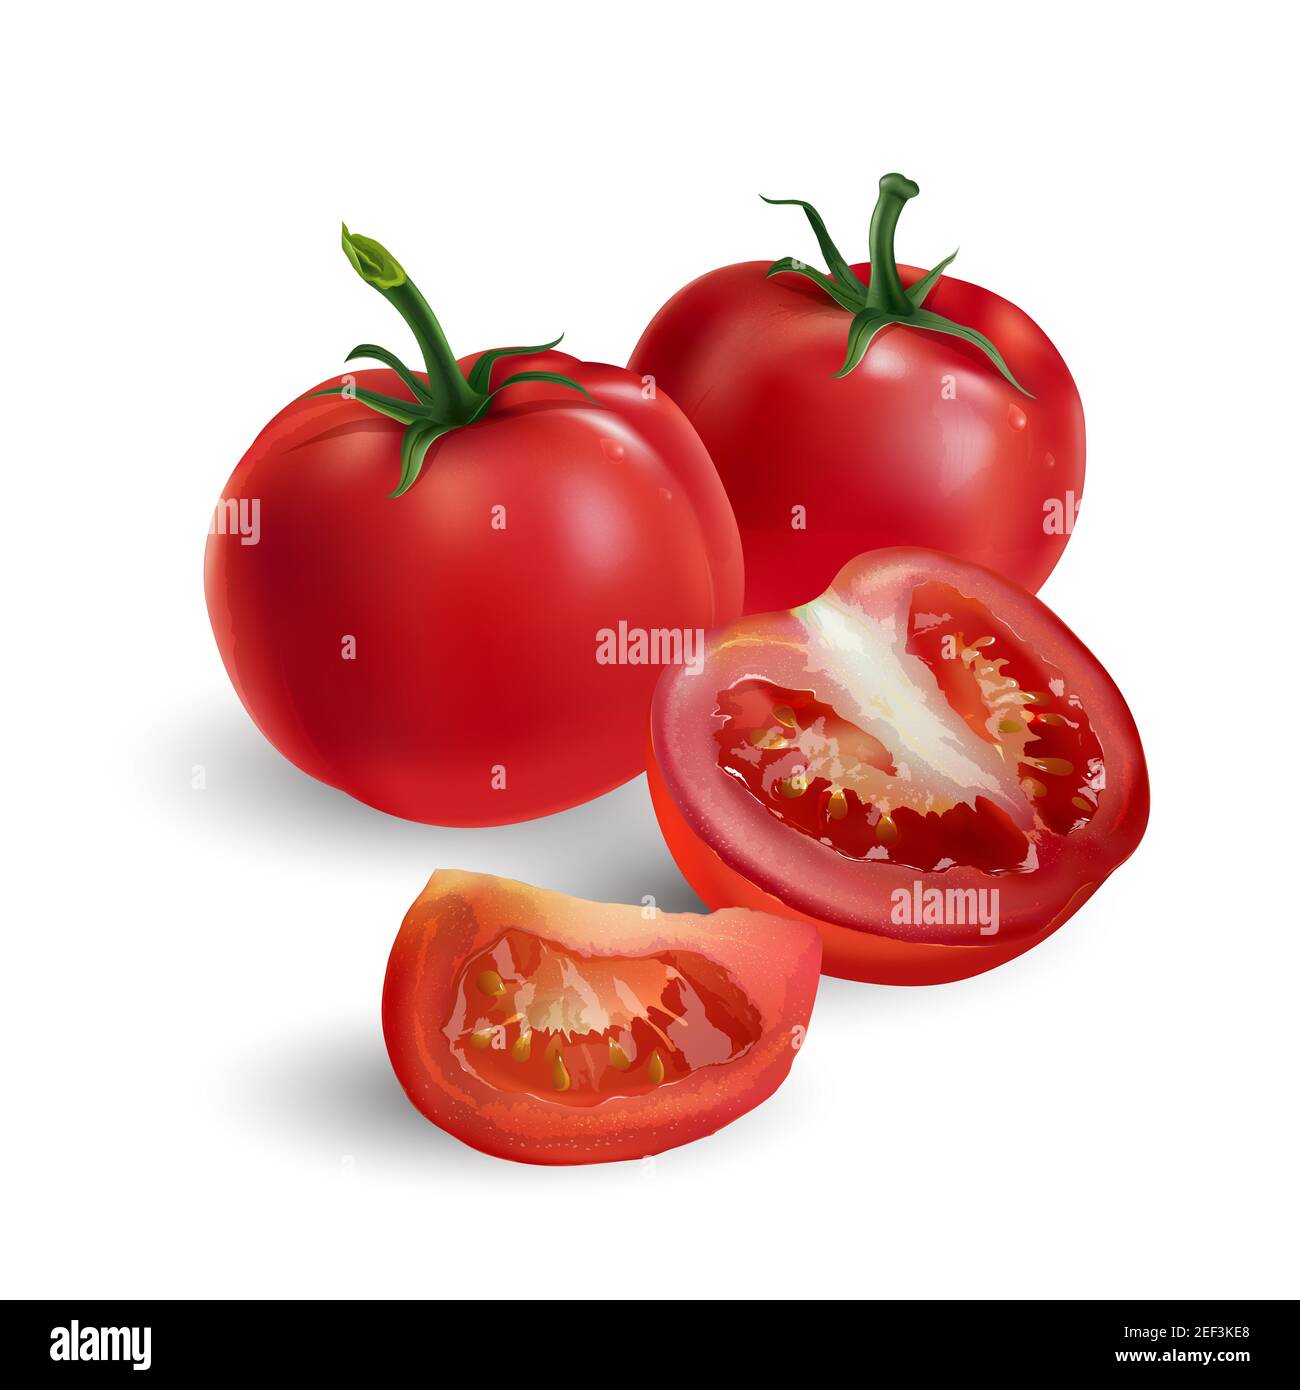 Whole and sliced red tomatoes on a white background. Stock Photo